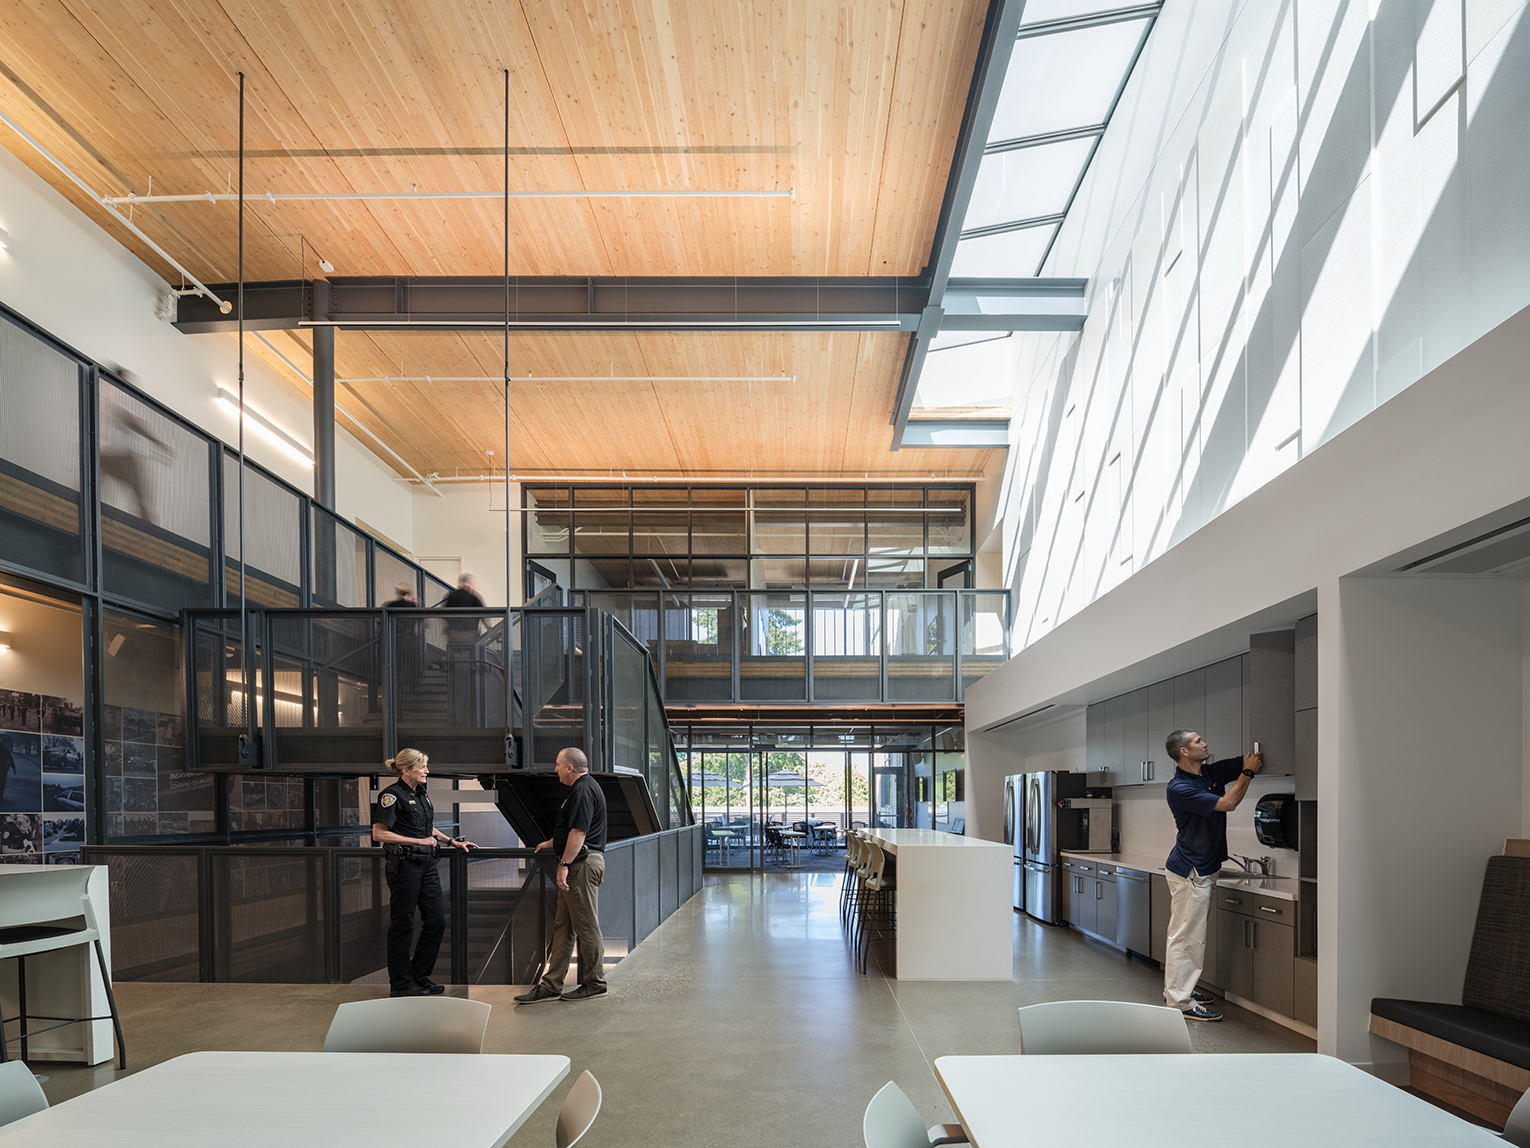 Large double-height Beaverton Public Safety Center break room featuring polished concrete floors, a mass timber ceiling, large skylights and a metal staircase with open hallway above.